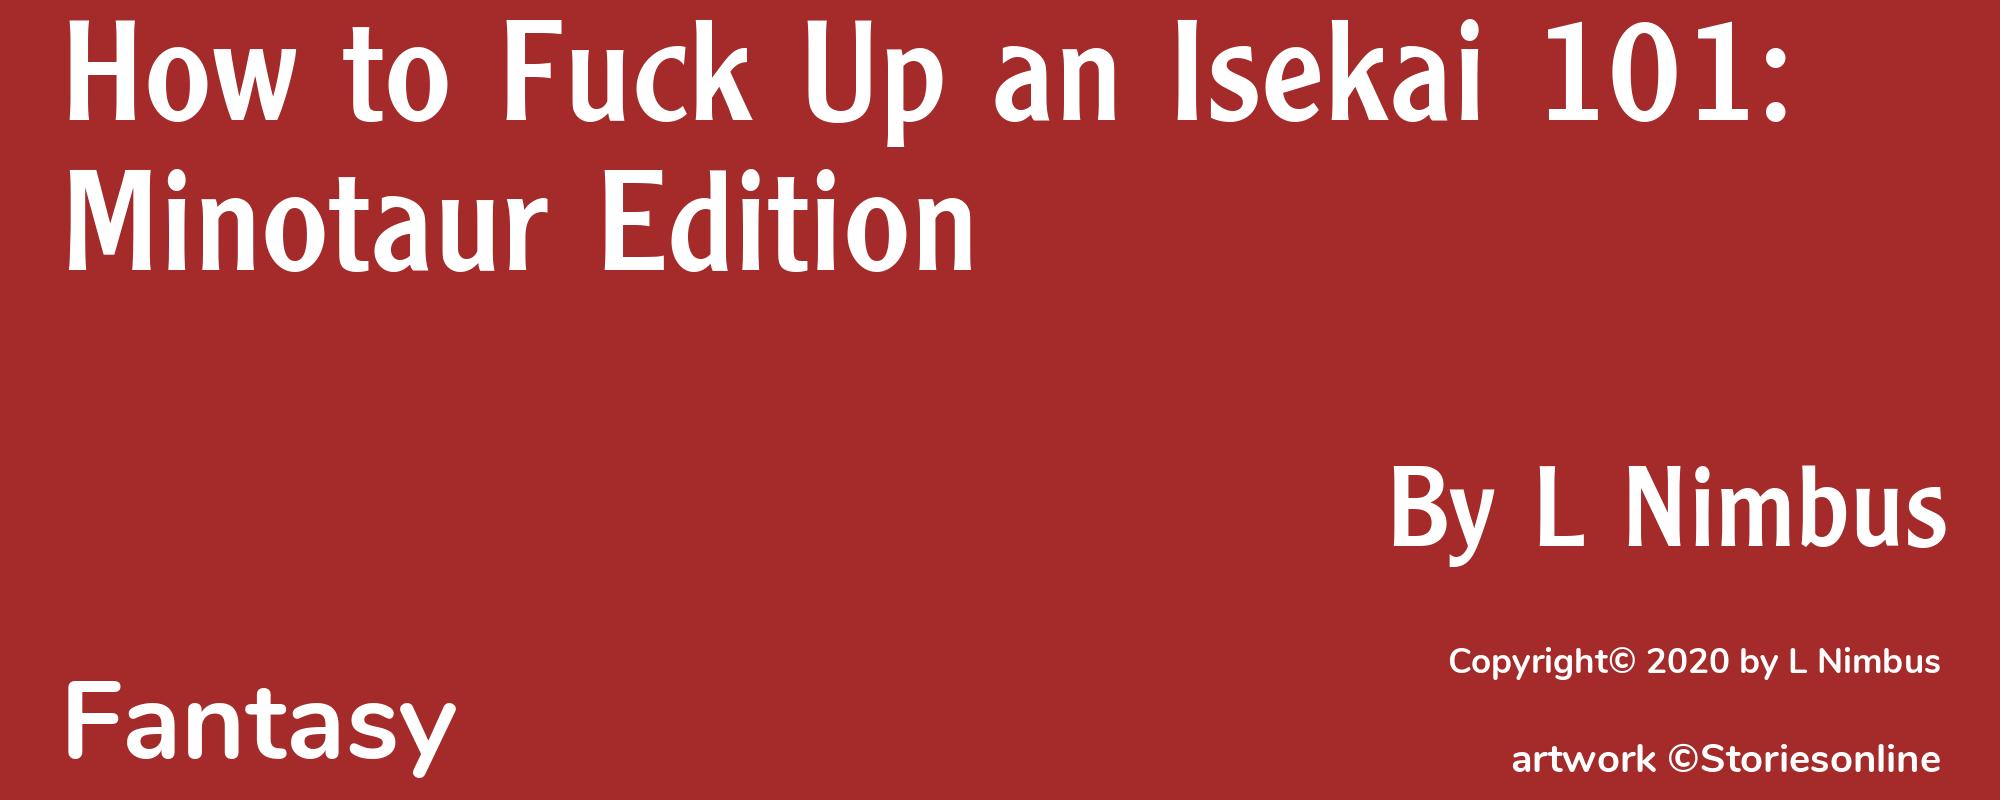 How to Fuck Up an Isekai 101: Minotaur Edition - Cover